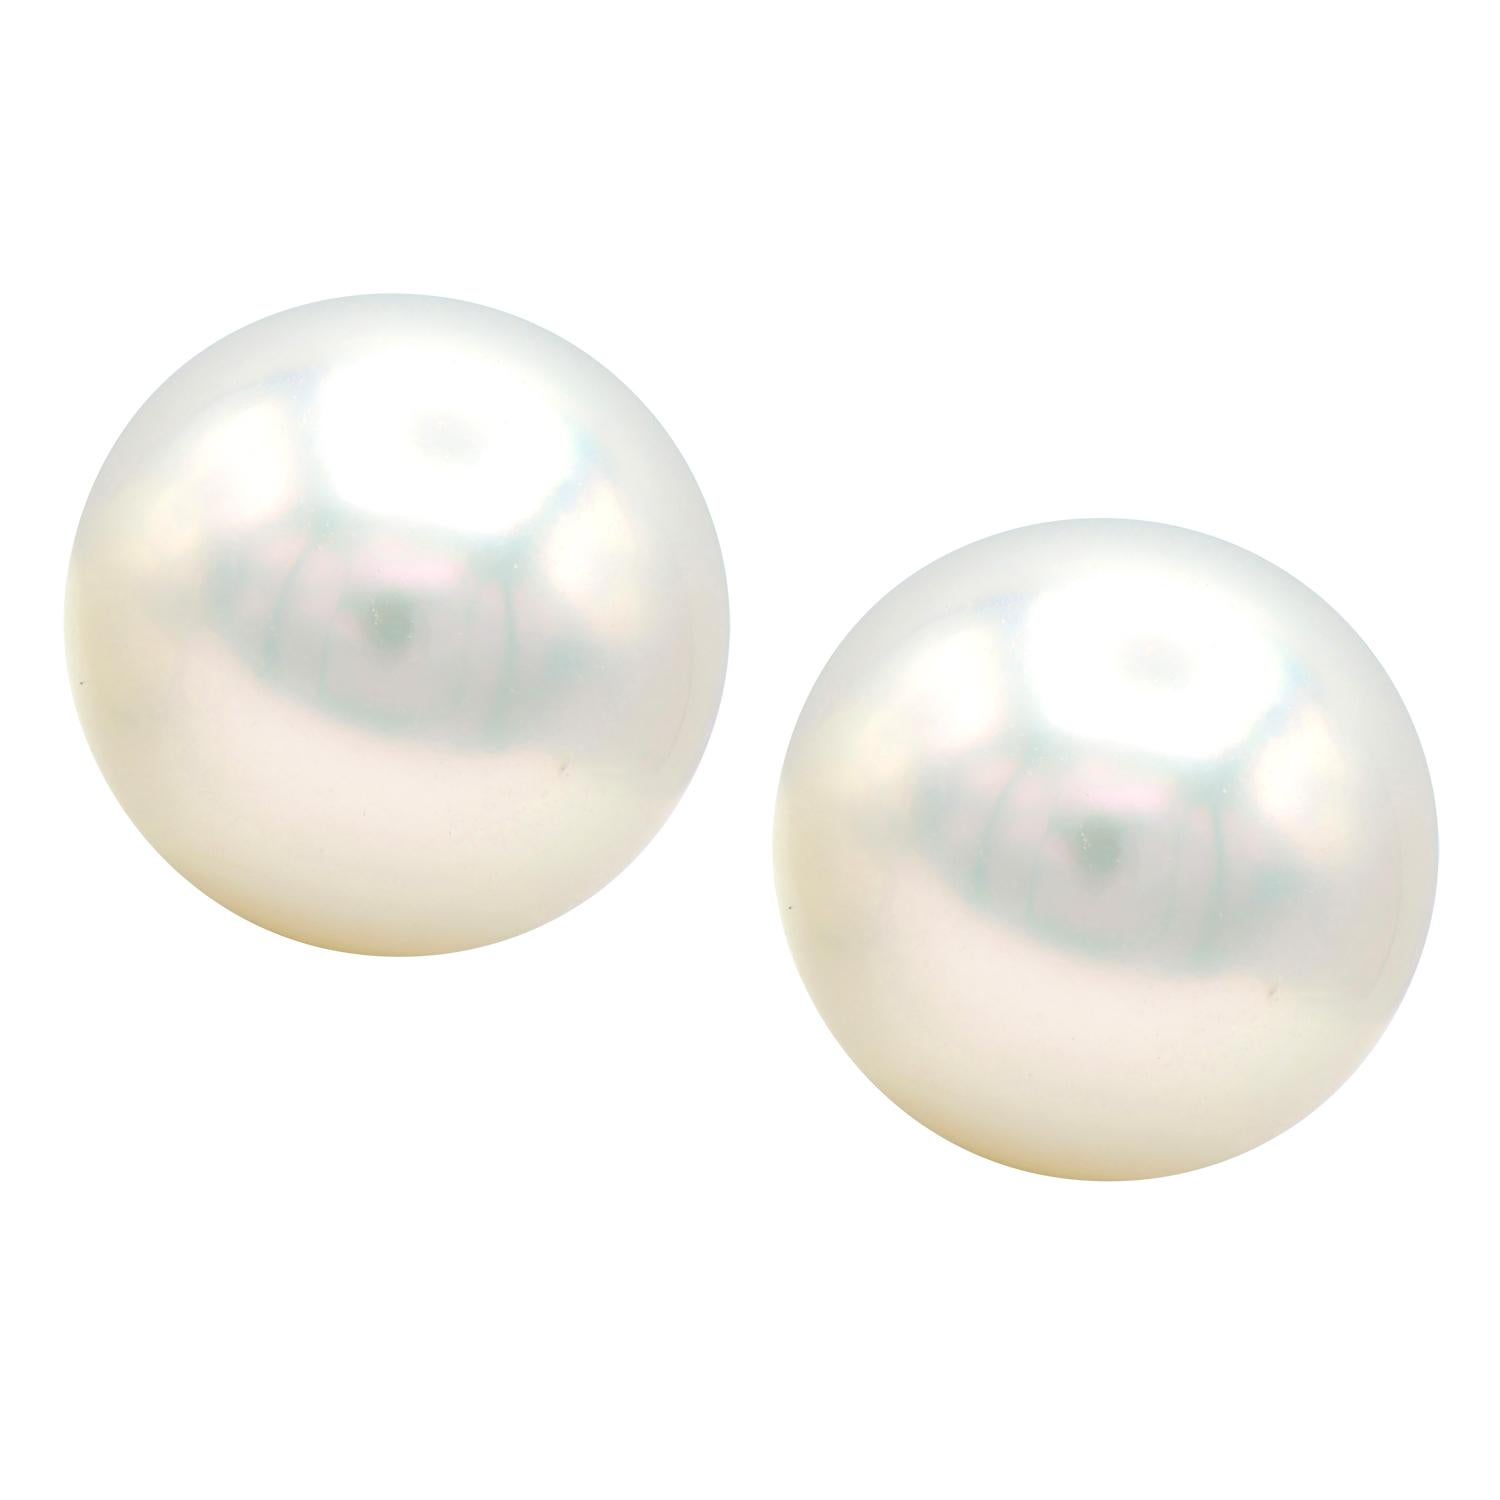 Contemporary 12-12.5mm South Sea Pearl Stud Earrings with 14 Karat White Gold Posts and Backs For Sale